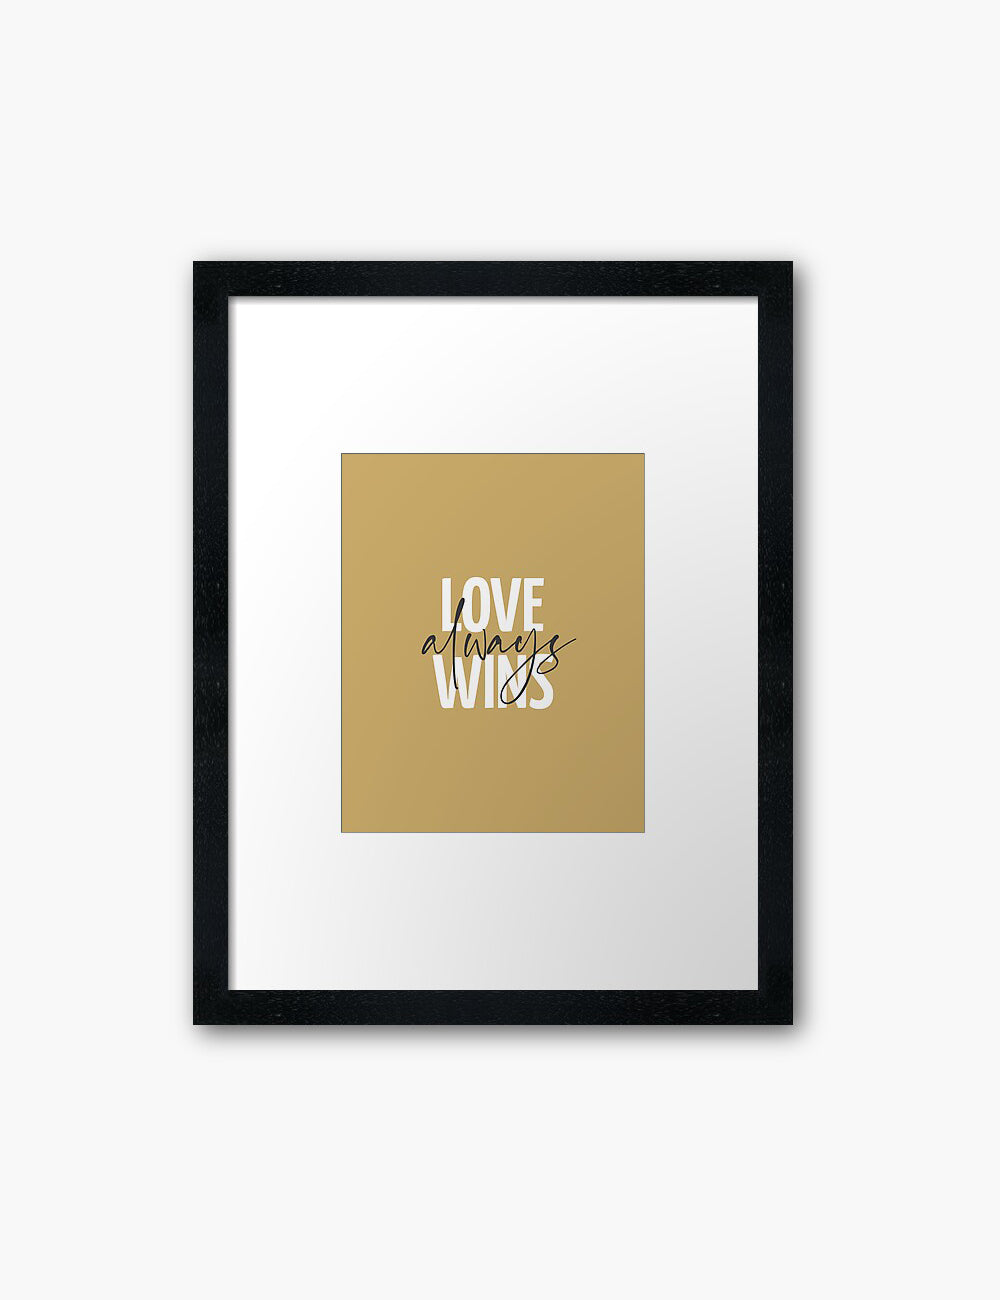 LOVE ALWAYS WINS. Yellow Gold. Love quote. Romantic words. Printable Wall Art Quote. - PAPER MOON Art & Design